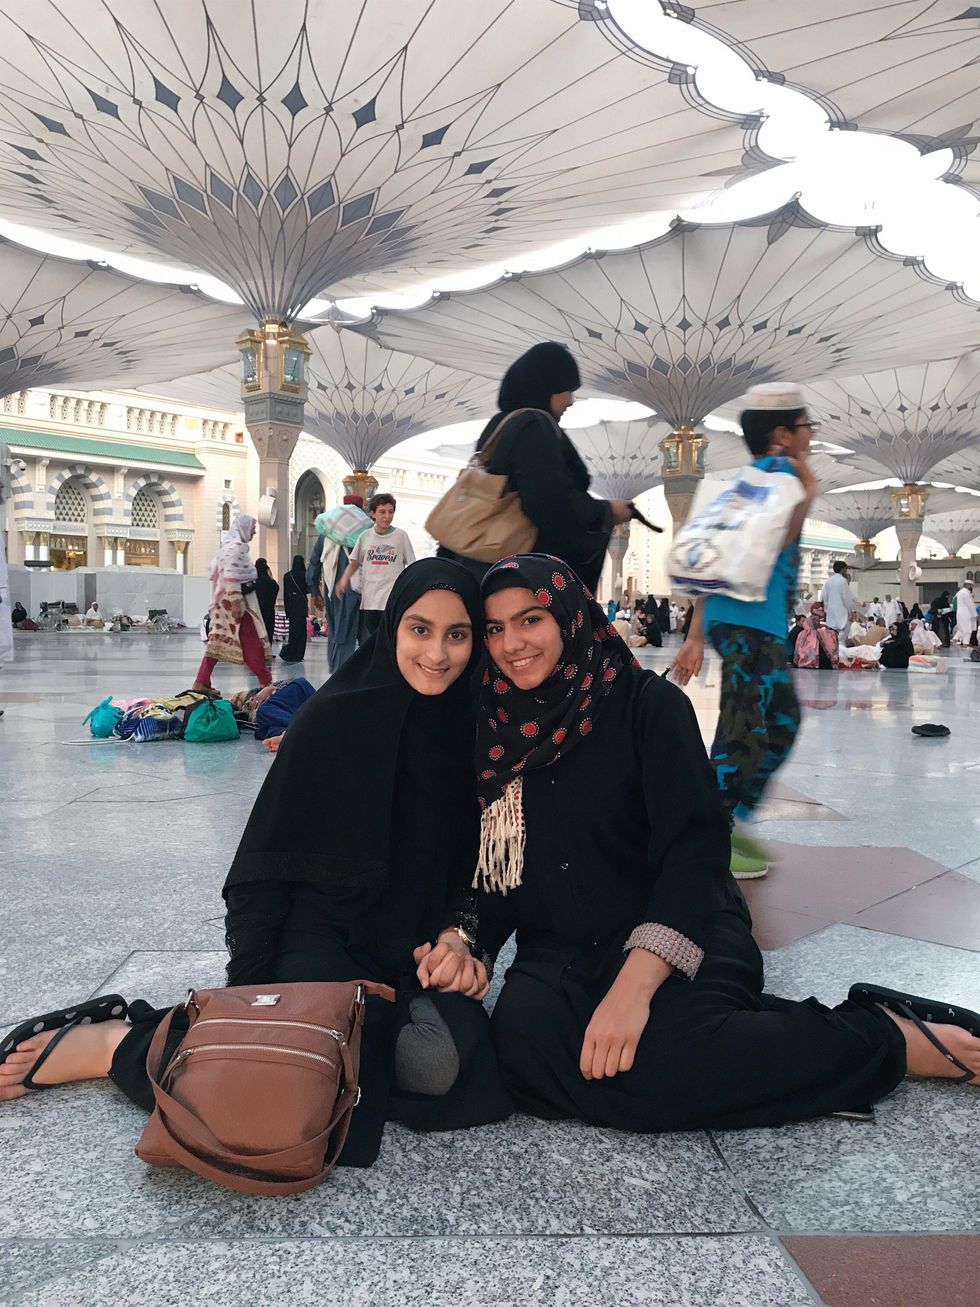 My Life-Changing Umrah Taught Me The Importance Of Faith And How To Live Outside Of Society’s Expectations